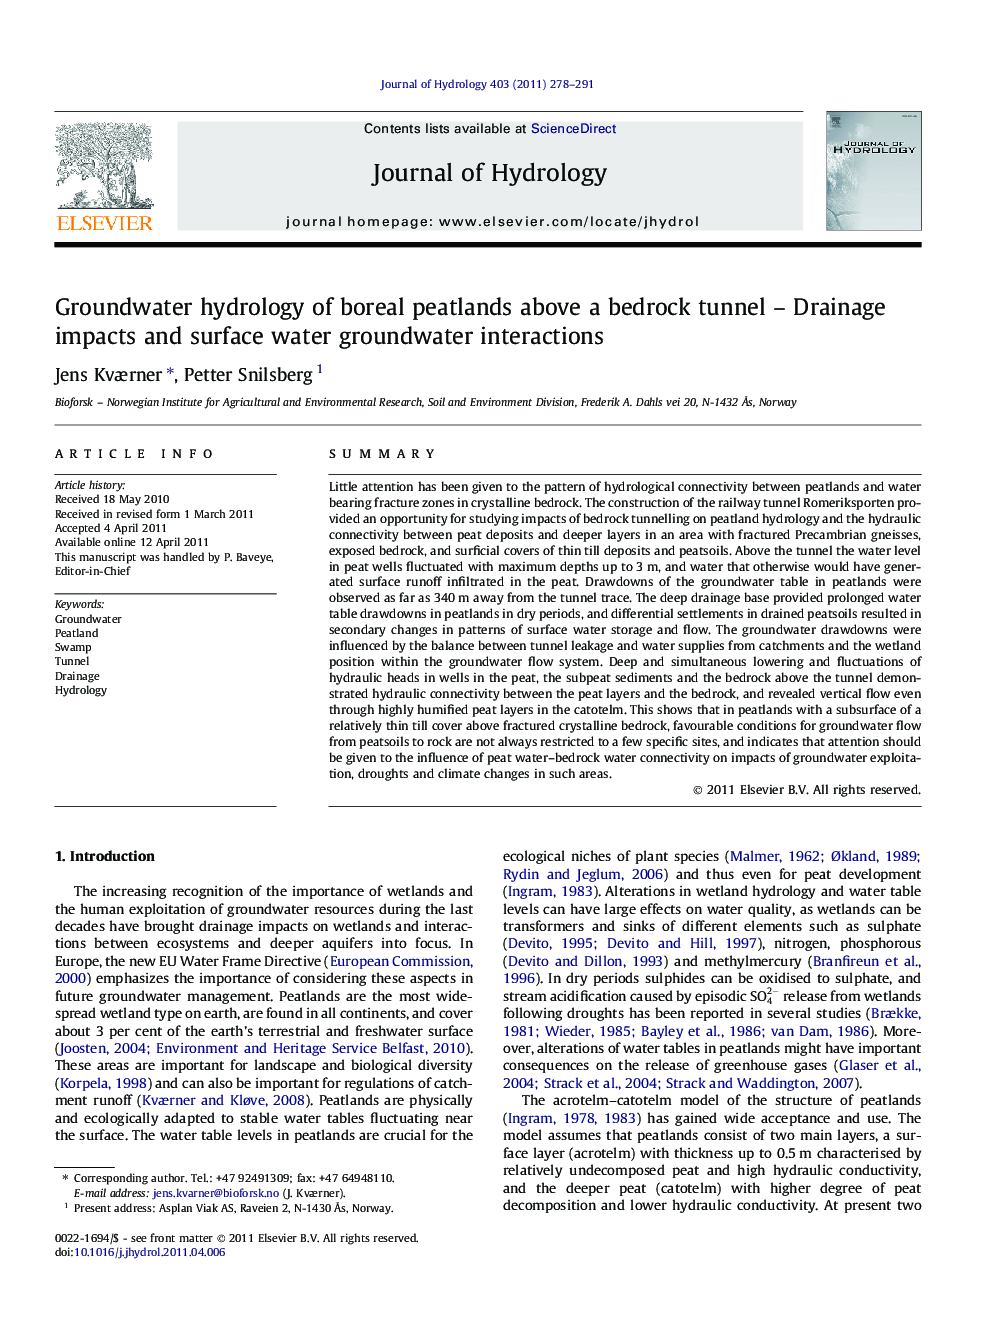 Groundwater hydrology of boreal peatlands above a bedrock tunnel – Drainage impacts and surface water groundwater interactions